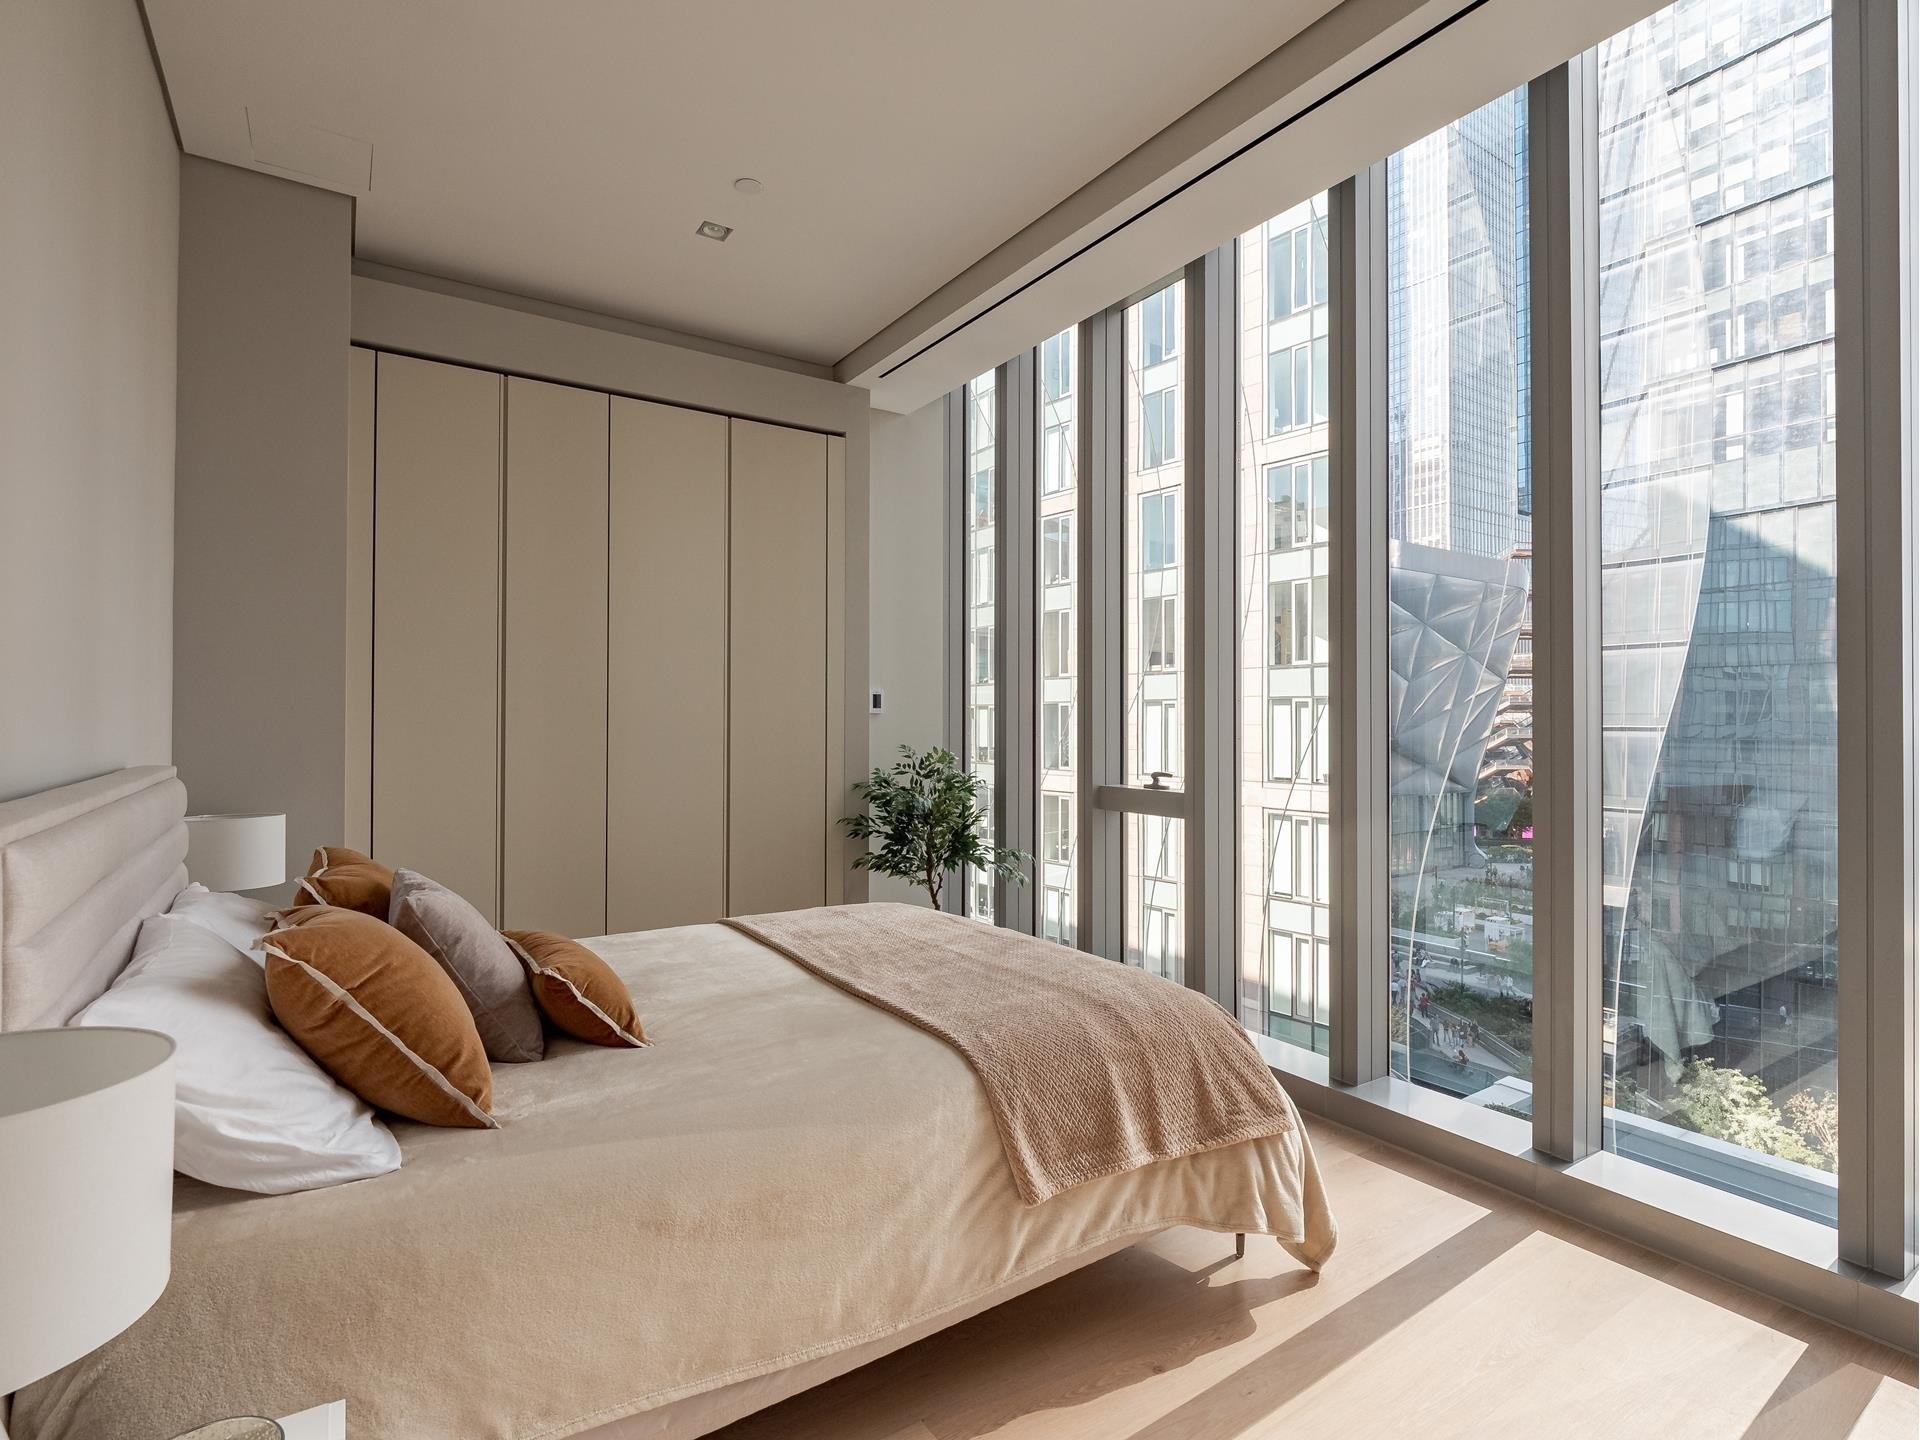 10. Condominiums for Sale at Five One Five, 515 W 29TH ST, 7N Hudson Yards, New York, New York 10001